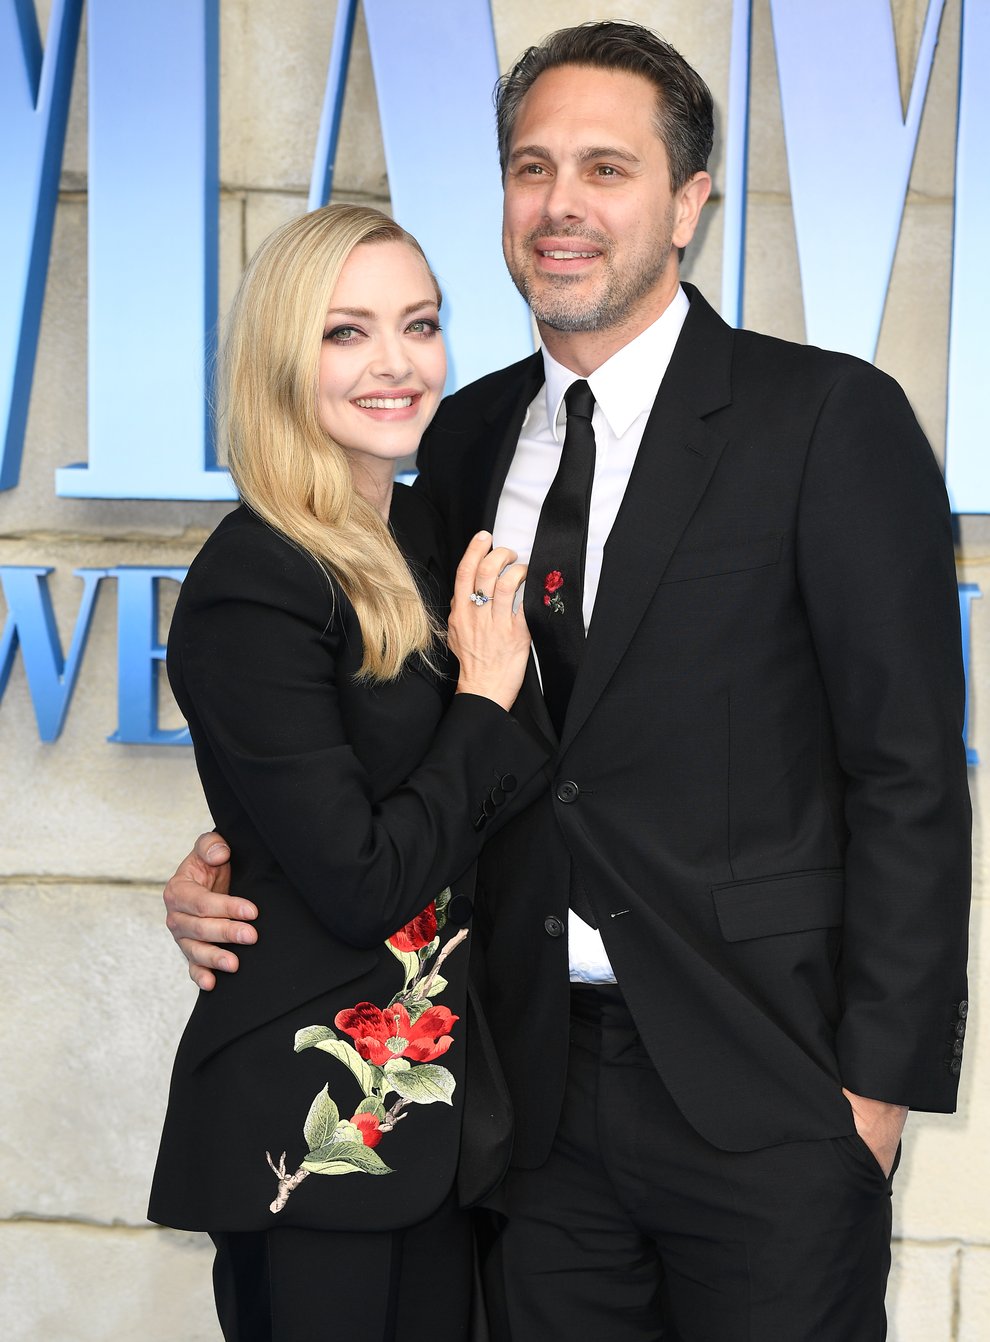 Seyfried and husband Thomas Sadoski have welcomed their second child